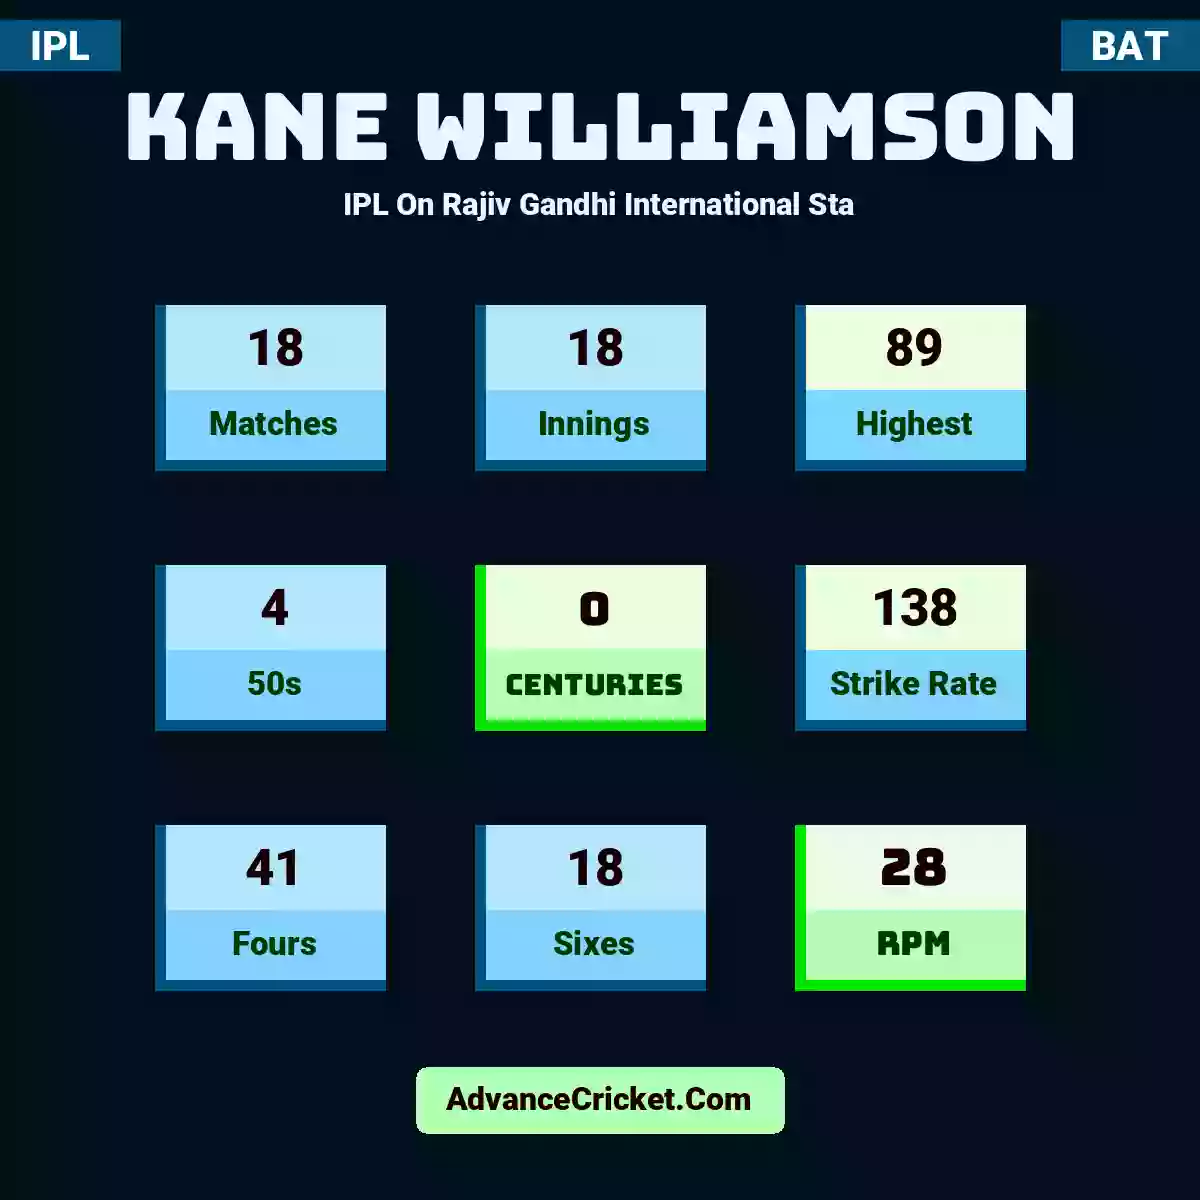 Kane Williamson IPL  On Rajiv Gandhi International Sta, Kane Williamson played 18 matches, scored 89 runs as highest, 4 half-centuries, and 0 centuries, with a strike rate of 138. K.Williamson hit 41 fours and 18 sixes, with an RPM of 28.